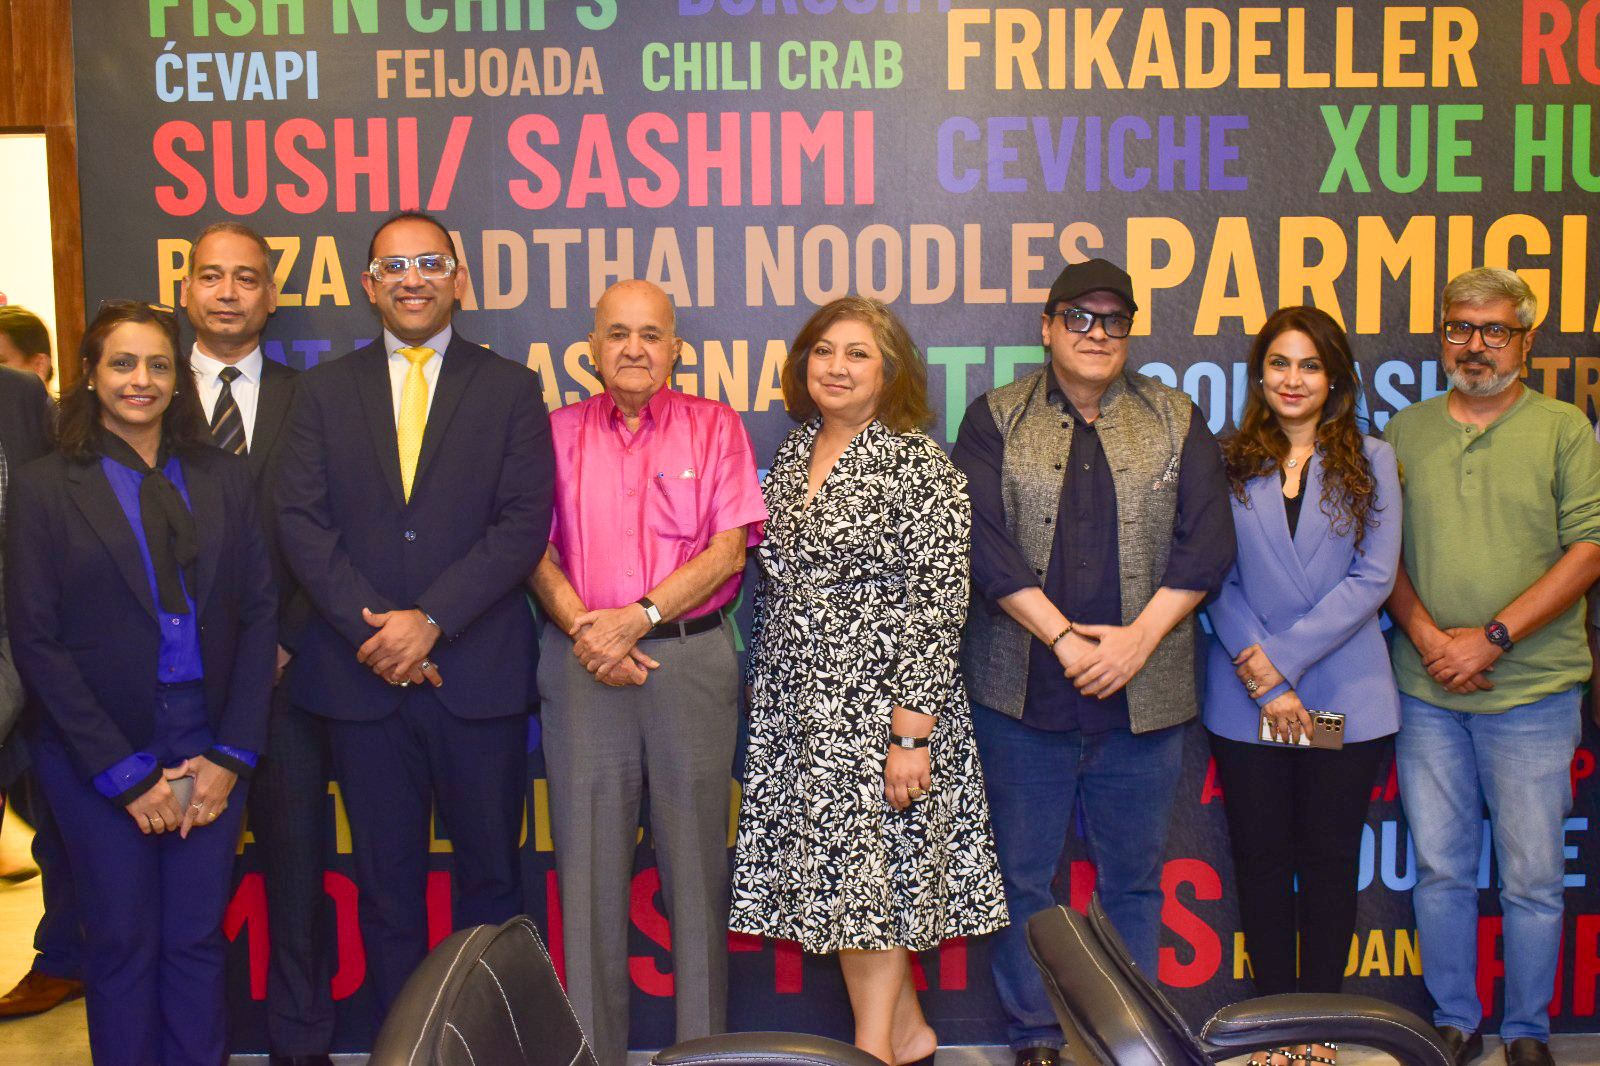 Lexicon Institute of Hotel Management unveils the Lexicon IHM Atelier X The FBAI Creators Studio in collaboration with The FBAI